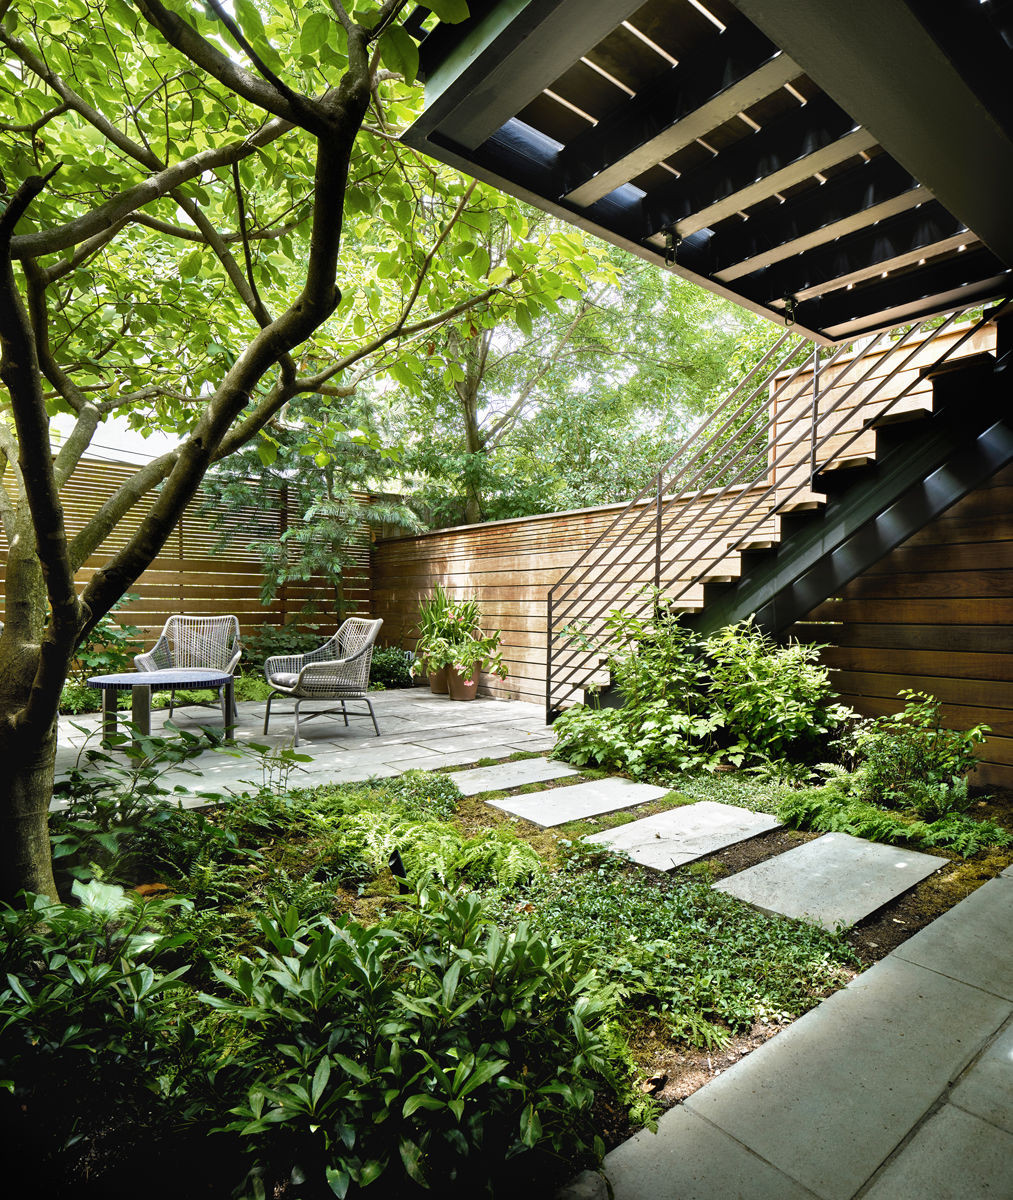 Backyard Privacy Landscaping
 Privacy Landscaping How to Use Plants in a City Garden